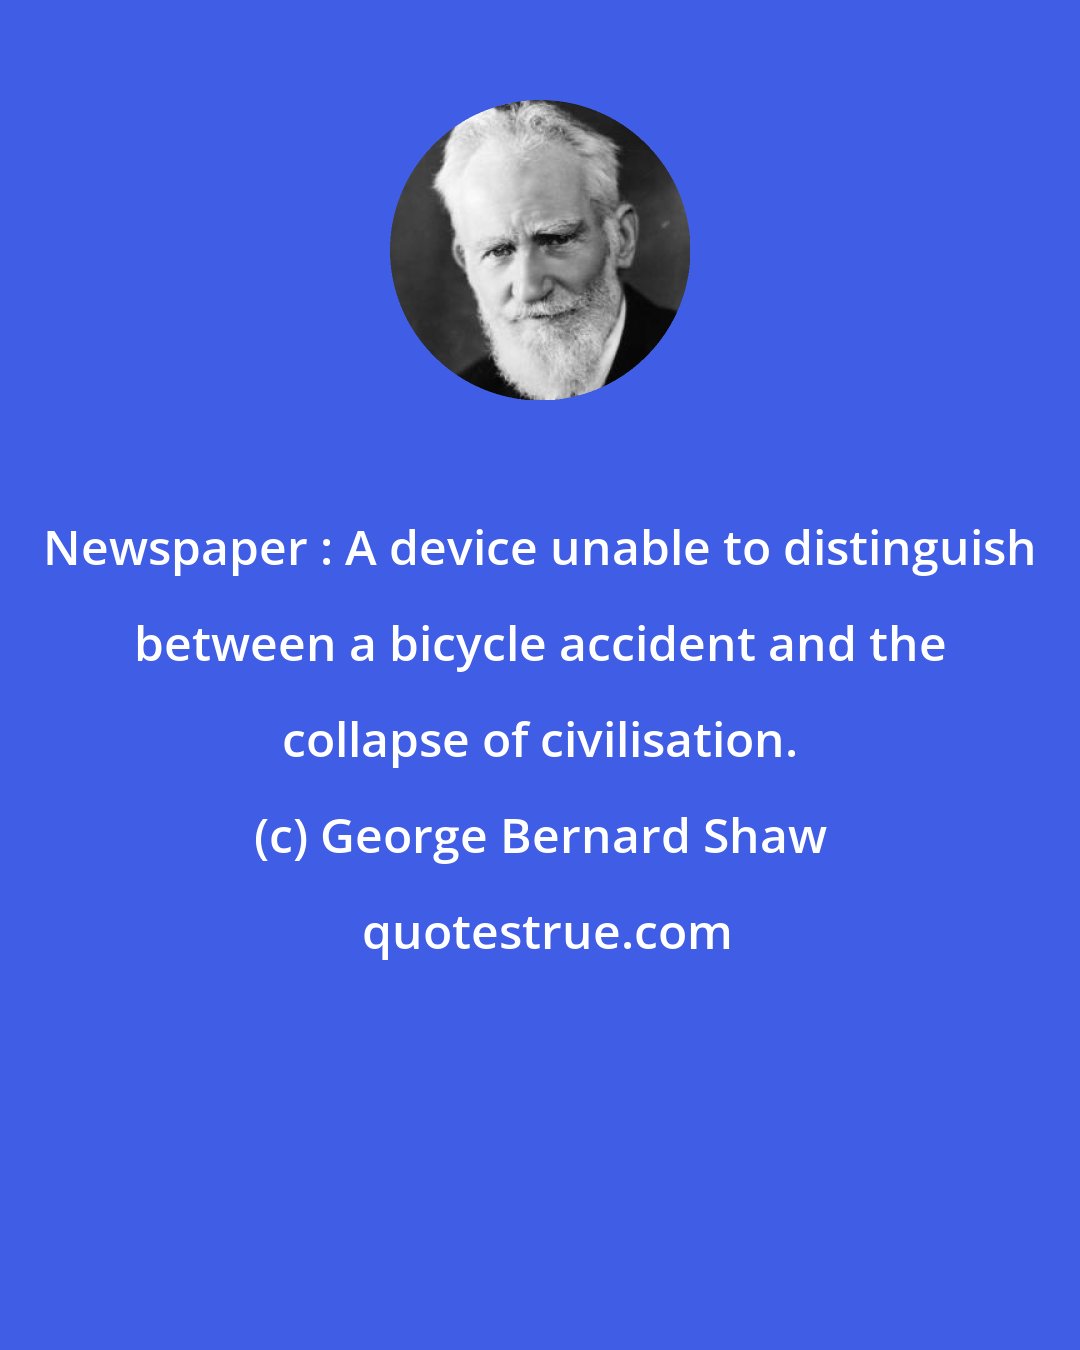 George Bernard Shaw: Newspaper : A device unable to distinguish between a bicycle accident and the collapse of civilisation.